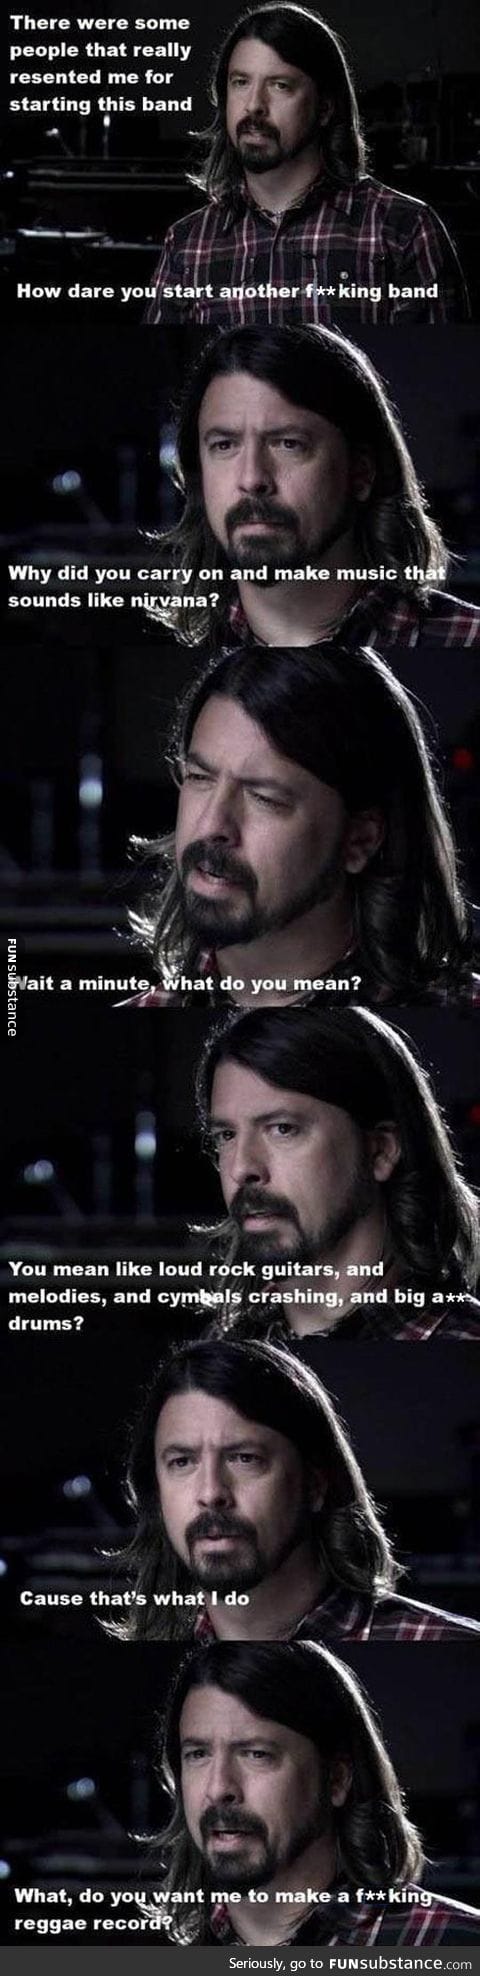 Dave Grohl telling it like it is